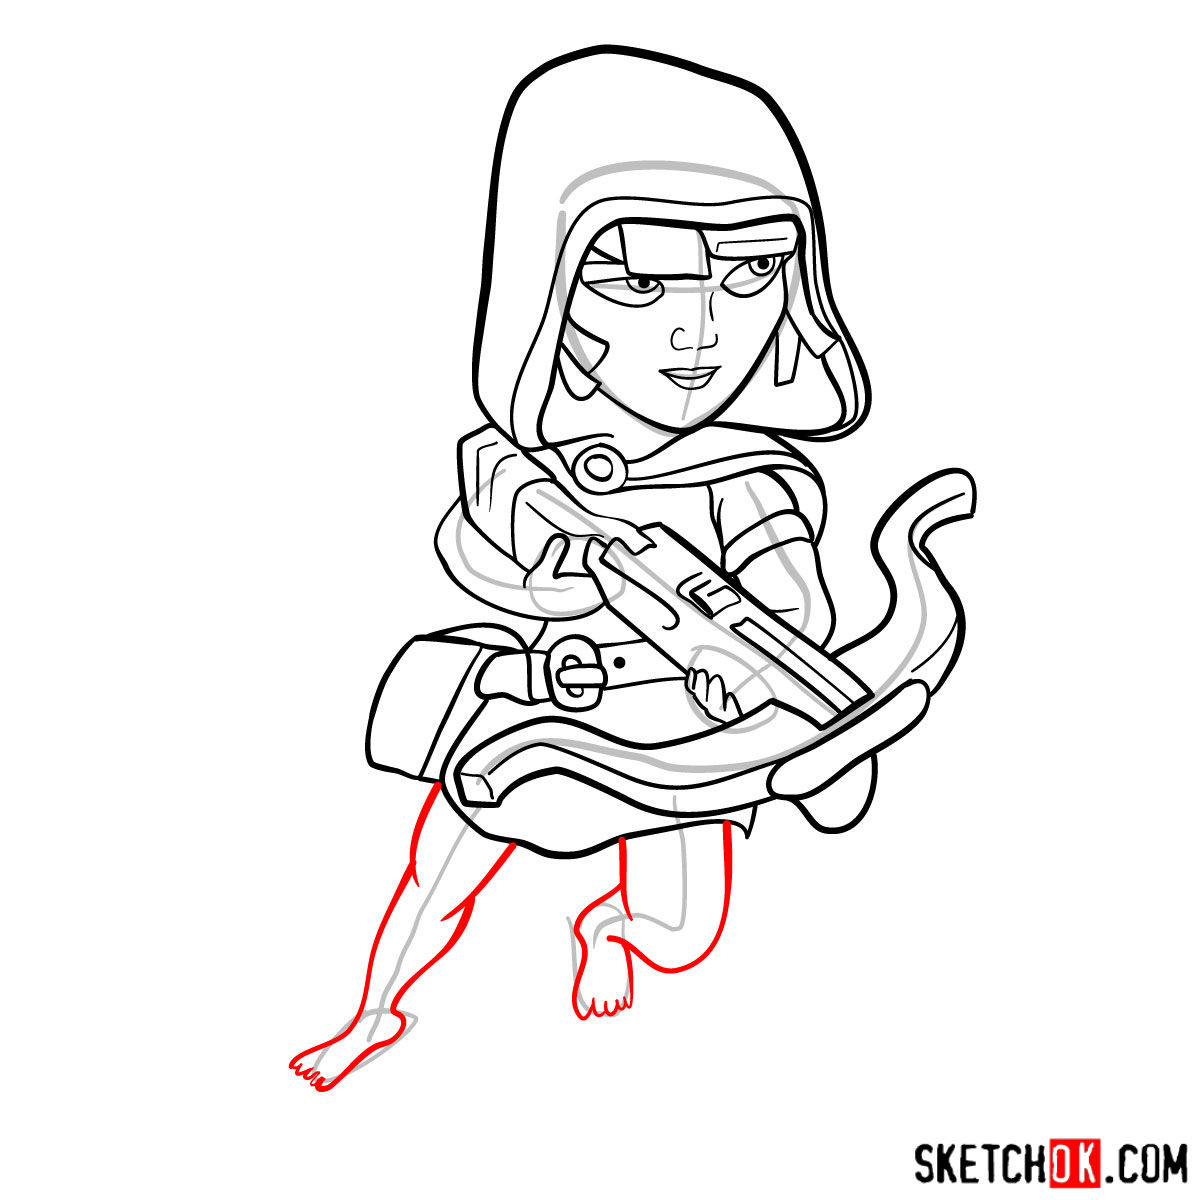 How to draw Sneaky Archer from Clash of Clans - step 08